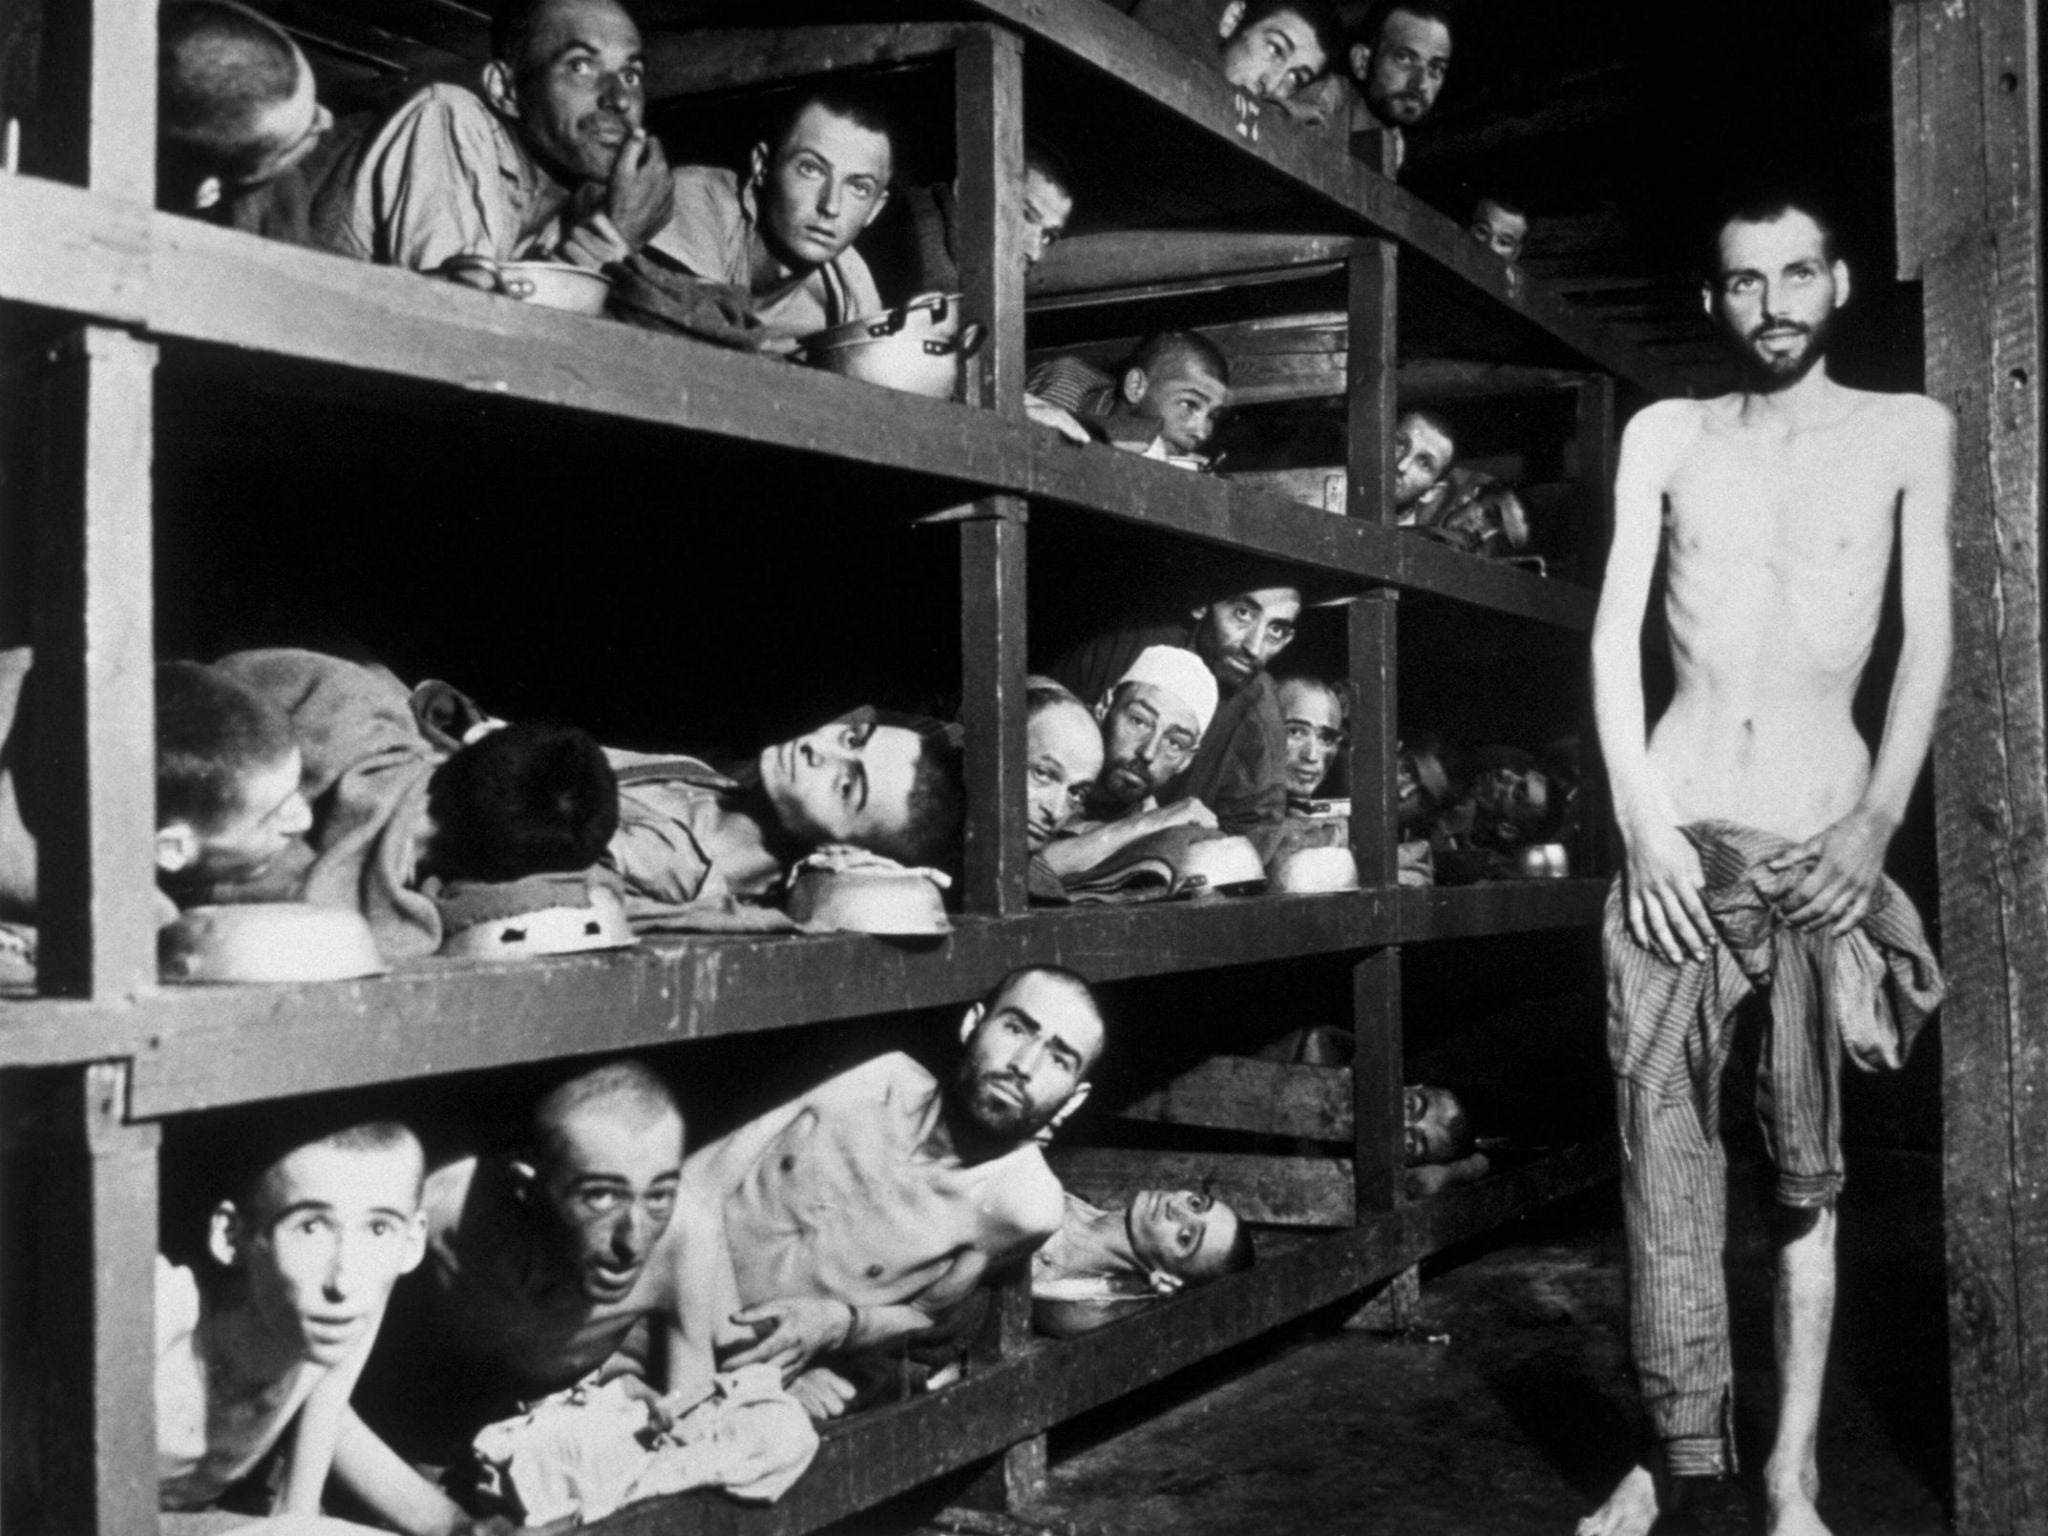 Survivors of the Buchenwald concentration camp, liberated by the American troops of the 80th Division in 1945